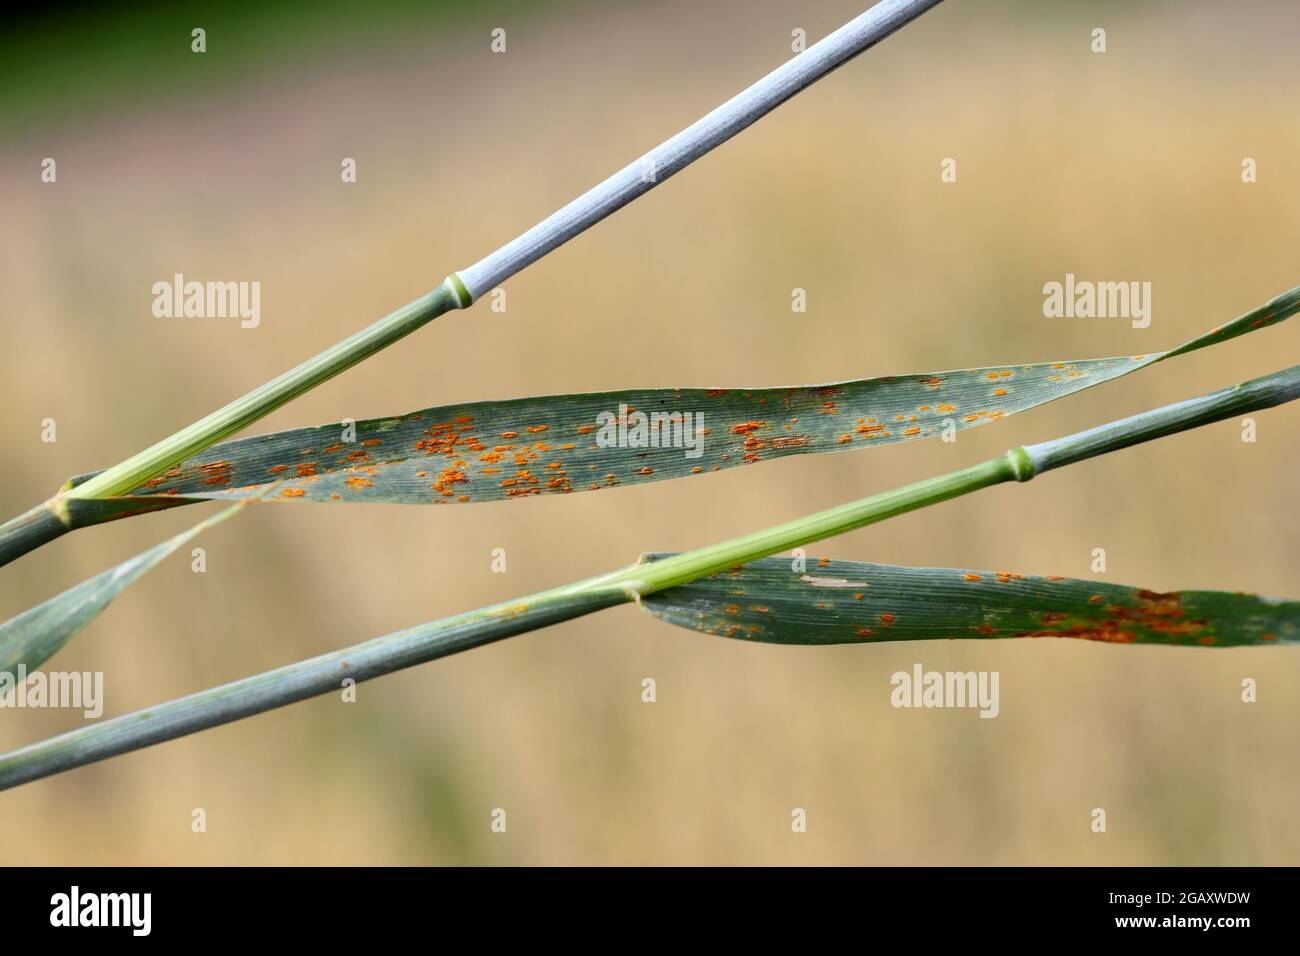 Stem rust, also known as cereal rust, black rust, red rust or red dust, is caused by the fungus Puccinia graminis, which causes significant disease. Stock Photo